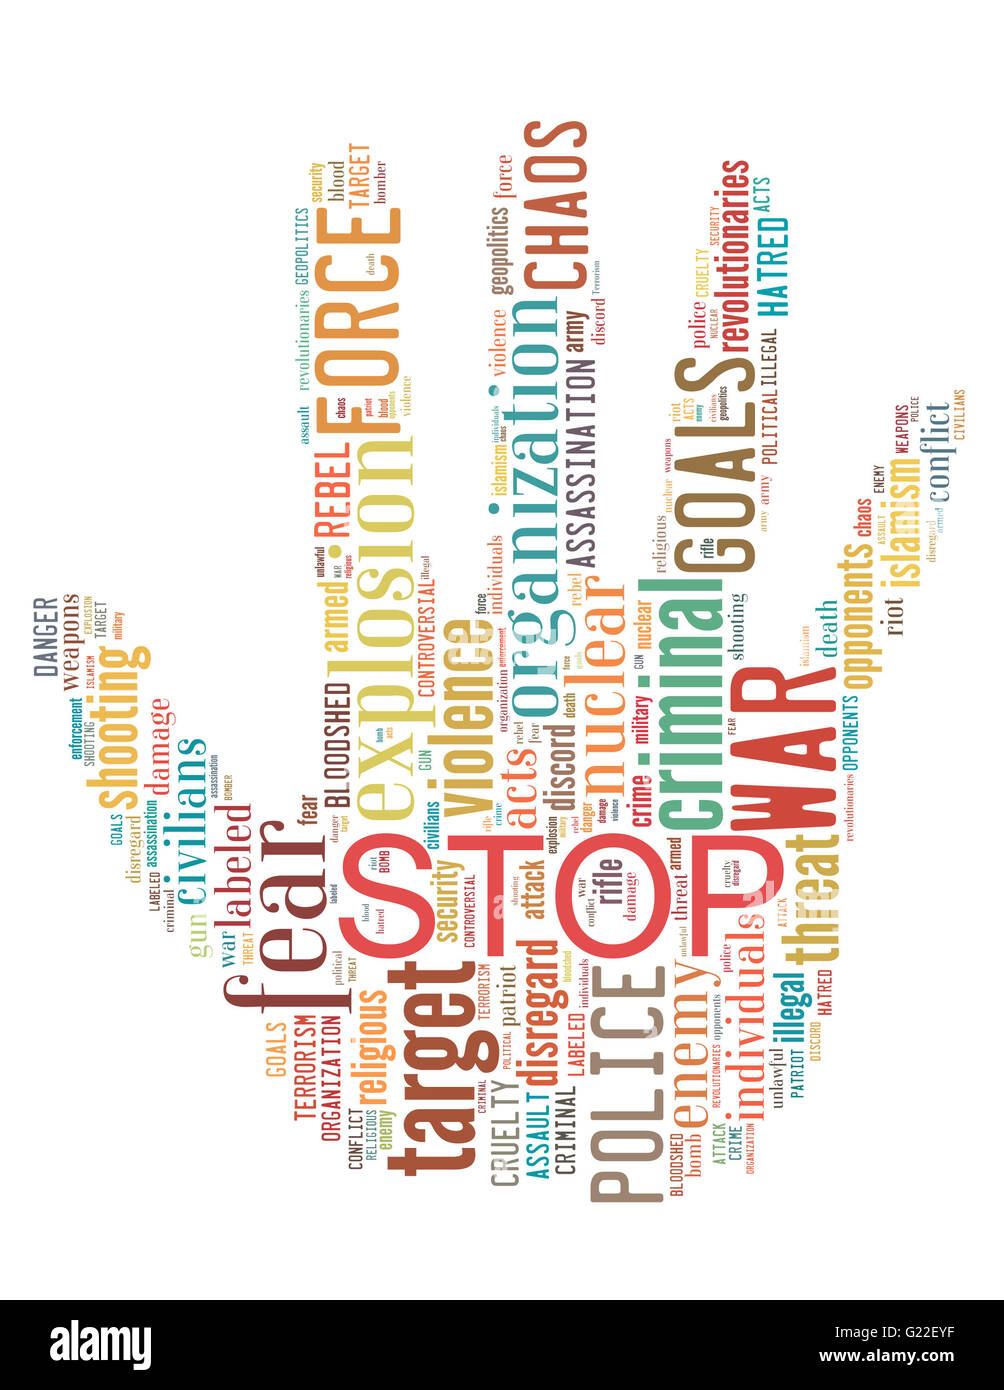 Stop Terrorism, Stop War, Stop Violence, word cloud concept on white background. Stock Photo